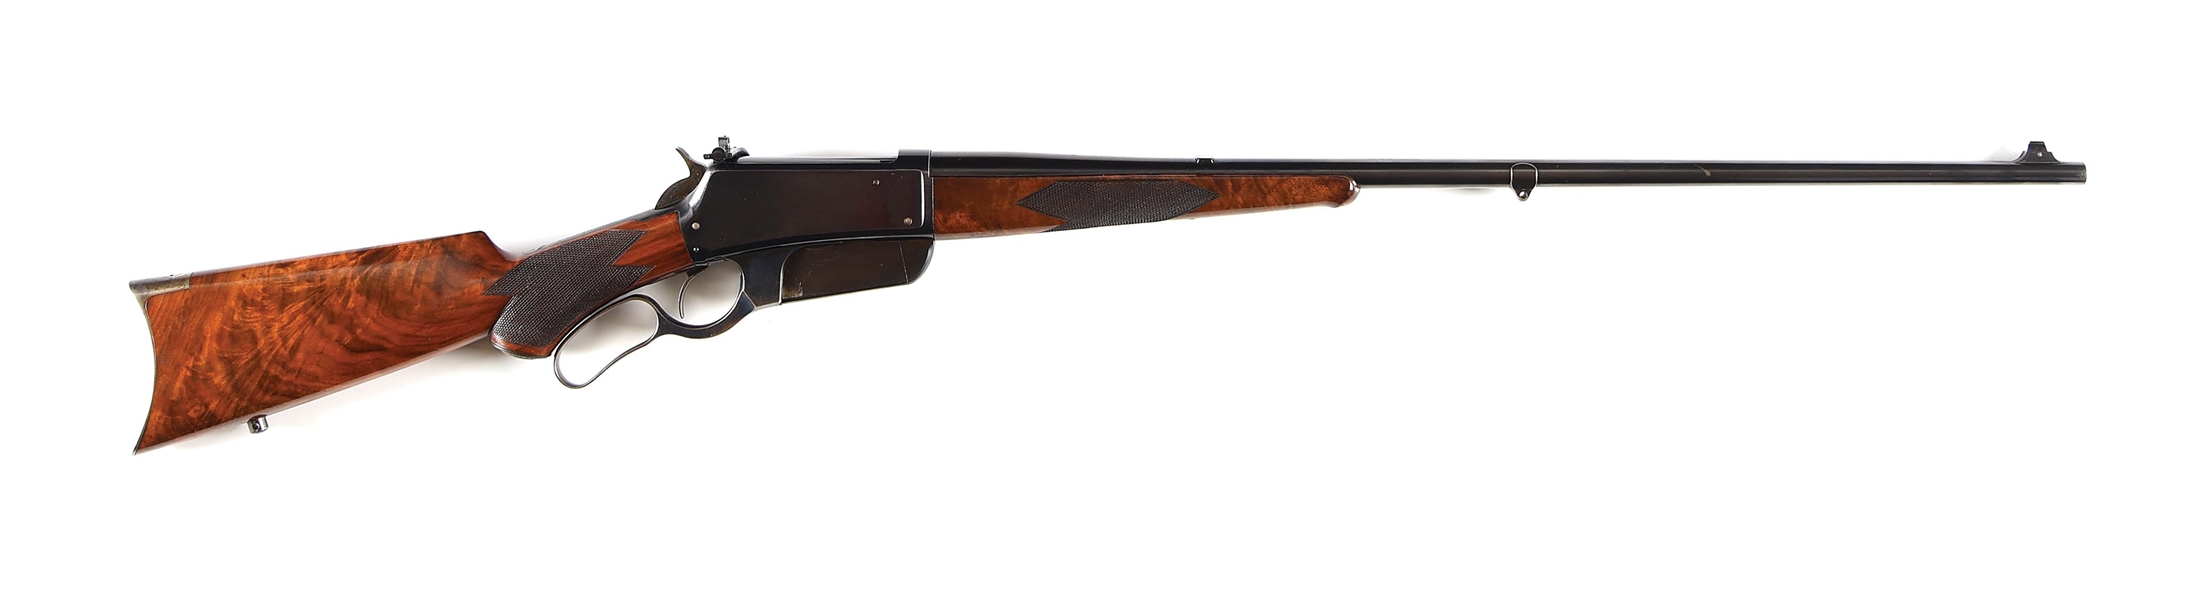 (A) STUNNING DELUXE FLATSIDE WINCHESTER MODEL 1895 LEVER ACTION RIFLE.